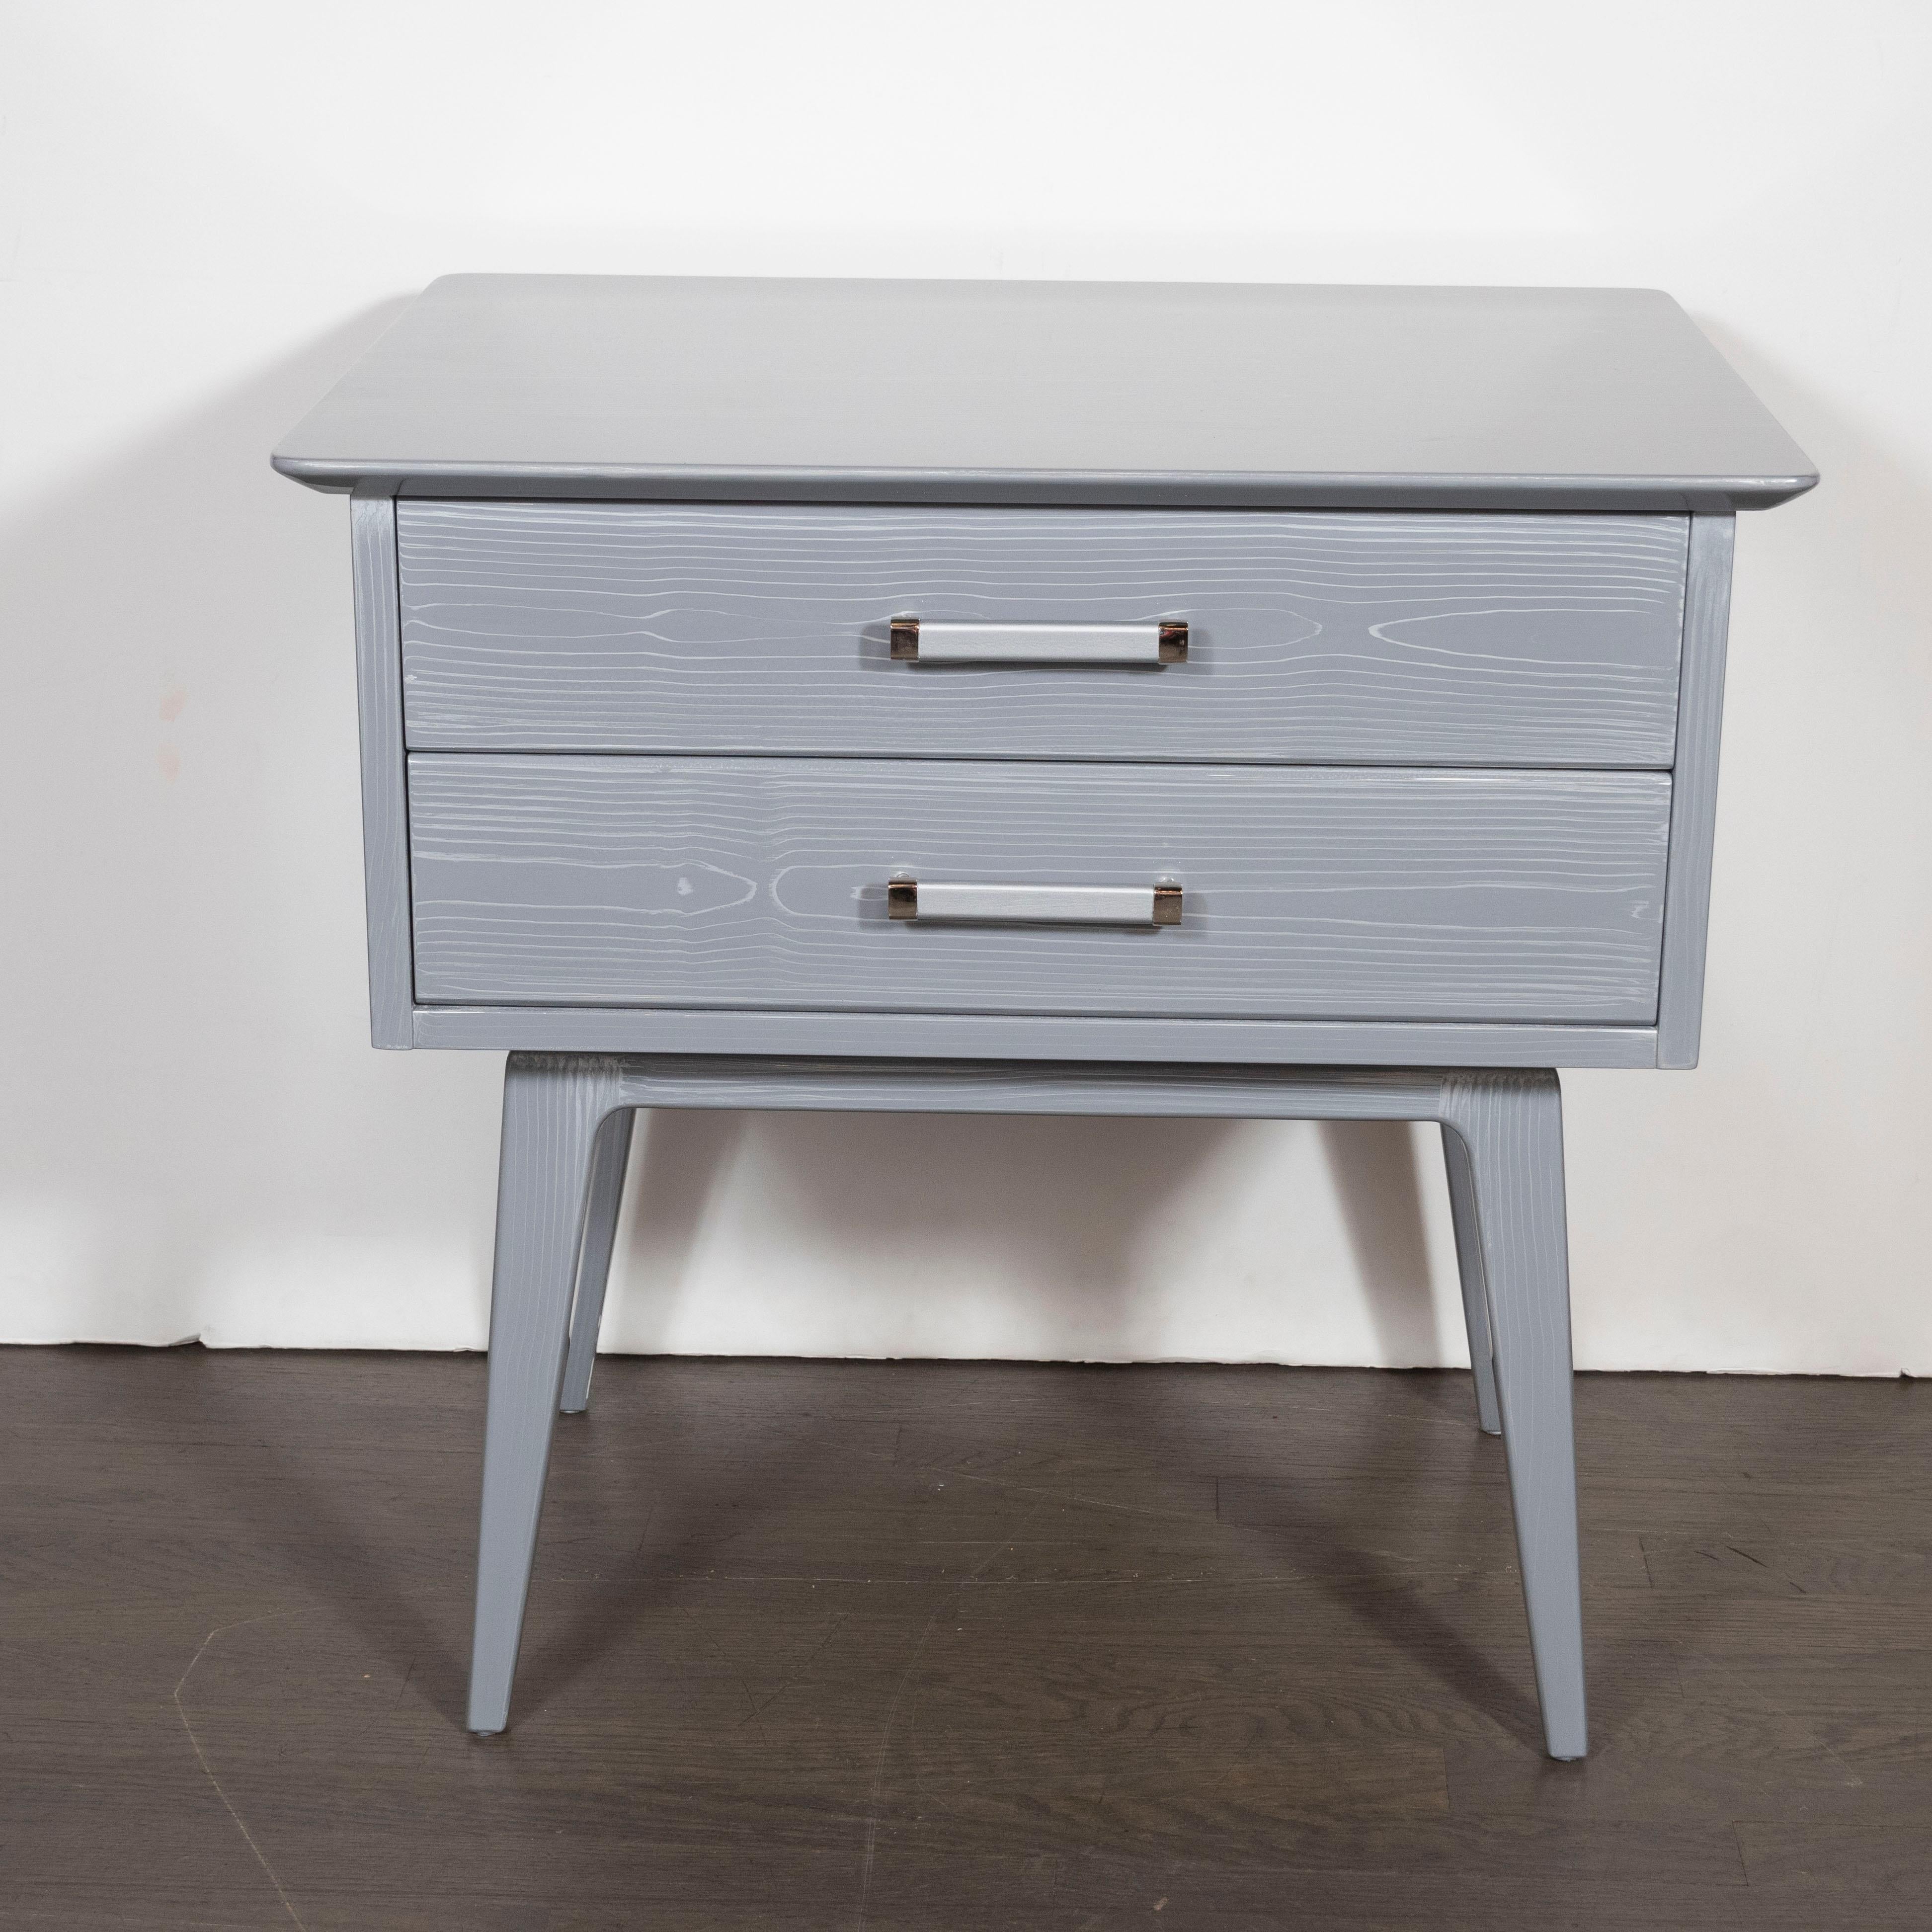 This stunning pair of Mid-Century Modern nightstands/ end tables were realized by John Stuart Inc. in the United States, circa 1950. They offer a volumetric rectangular body; slightly cantilevered top with rounded edges; splayed tapered legs; and